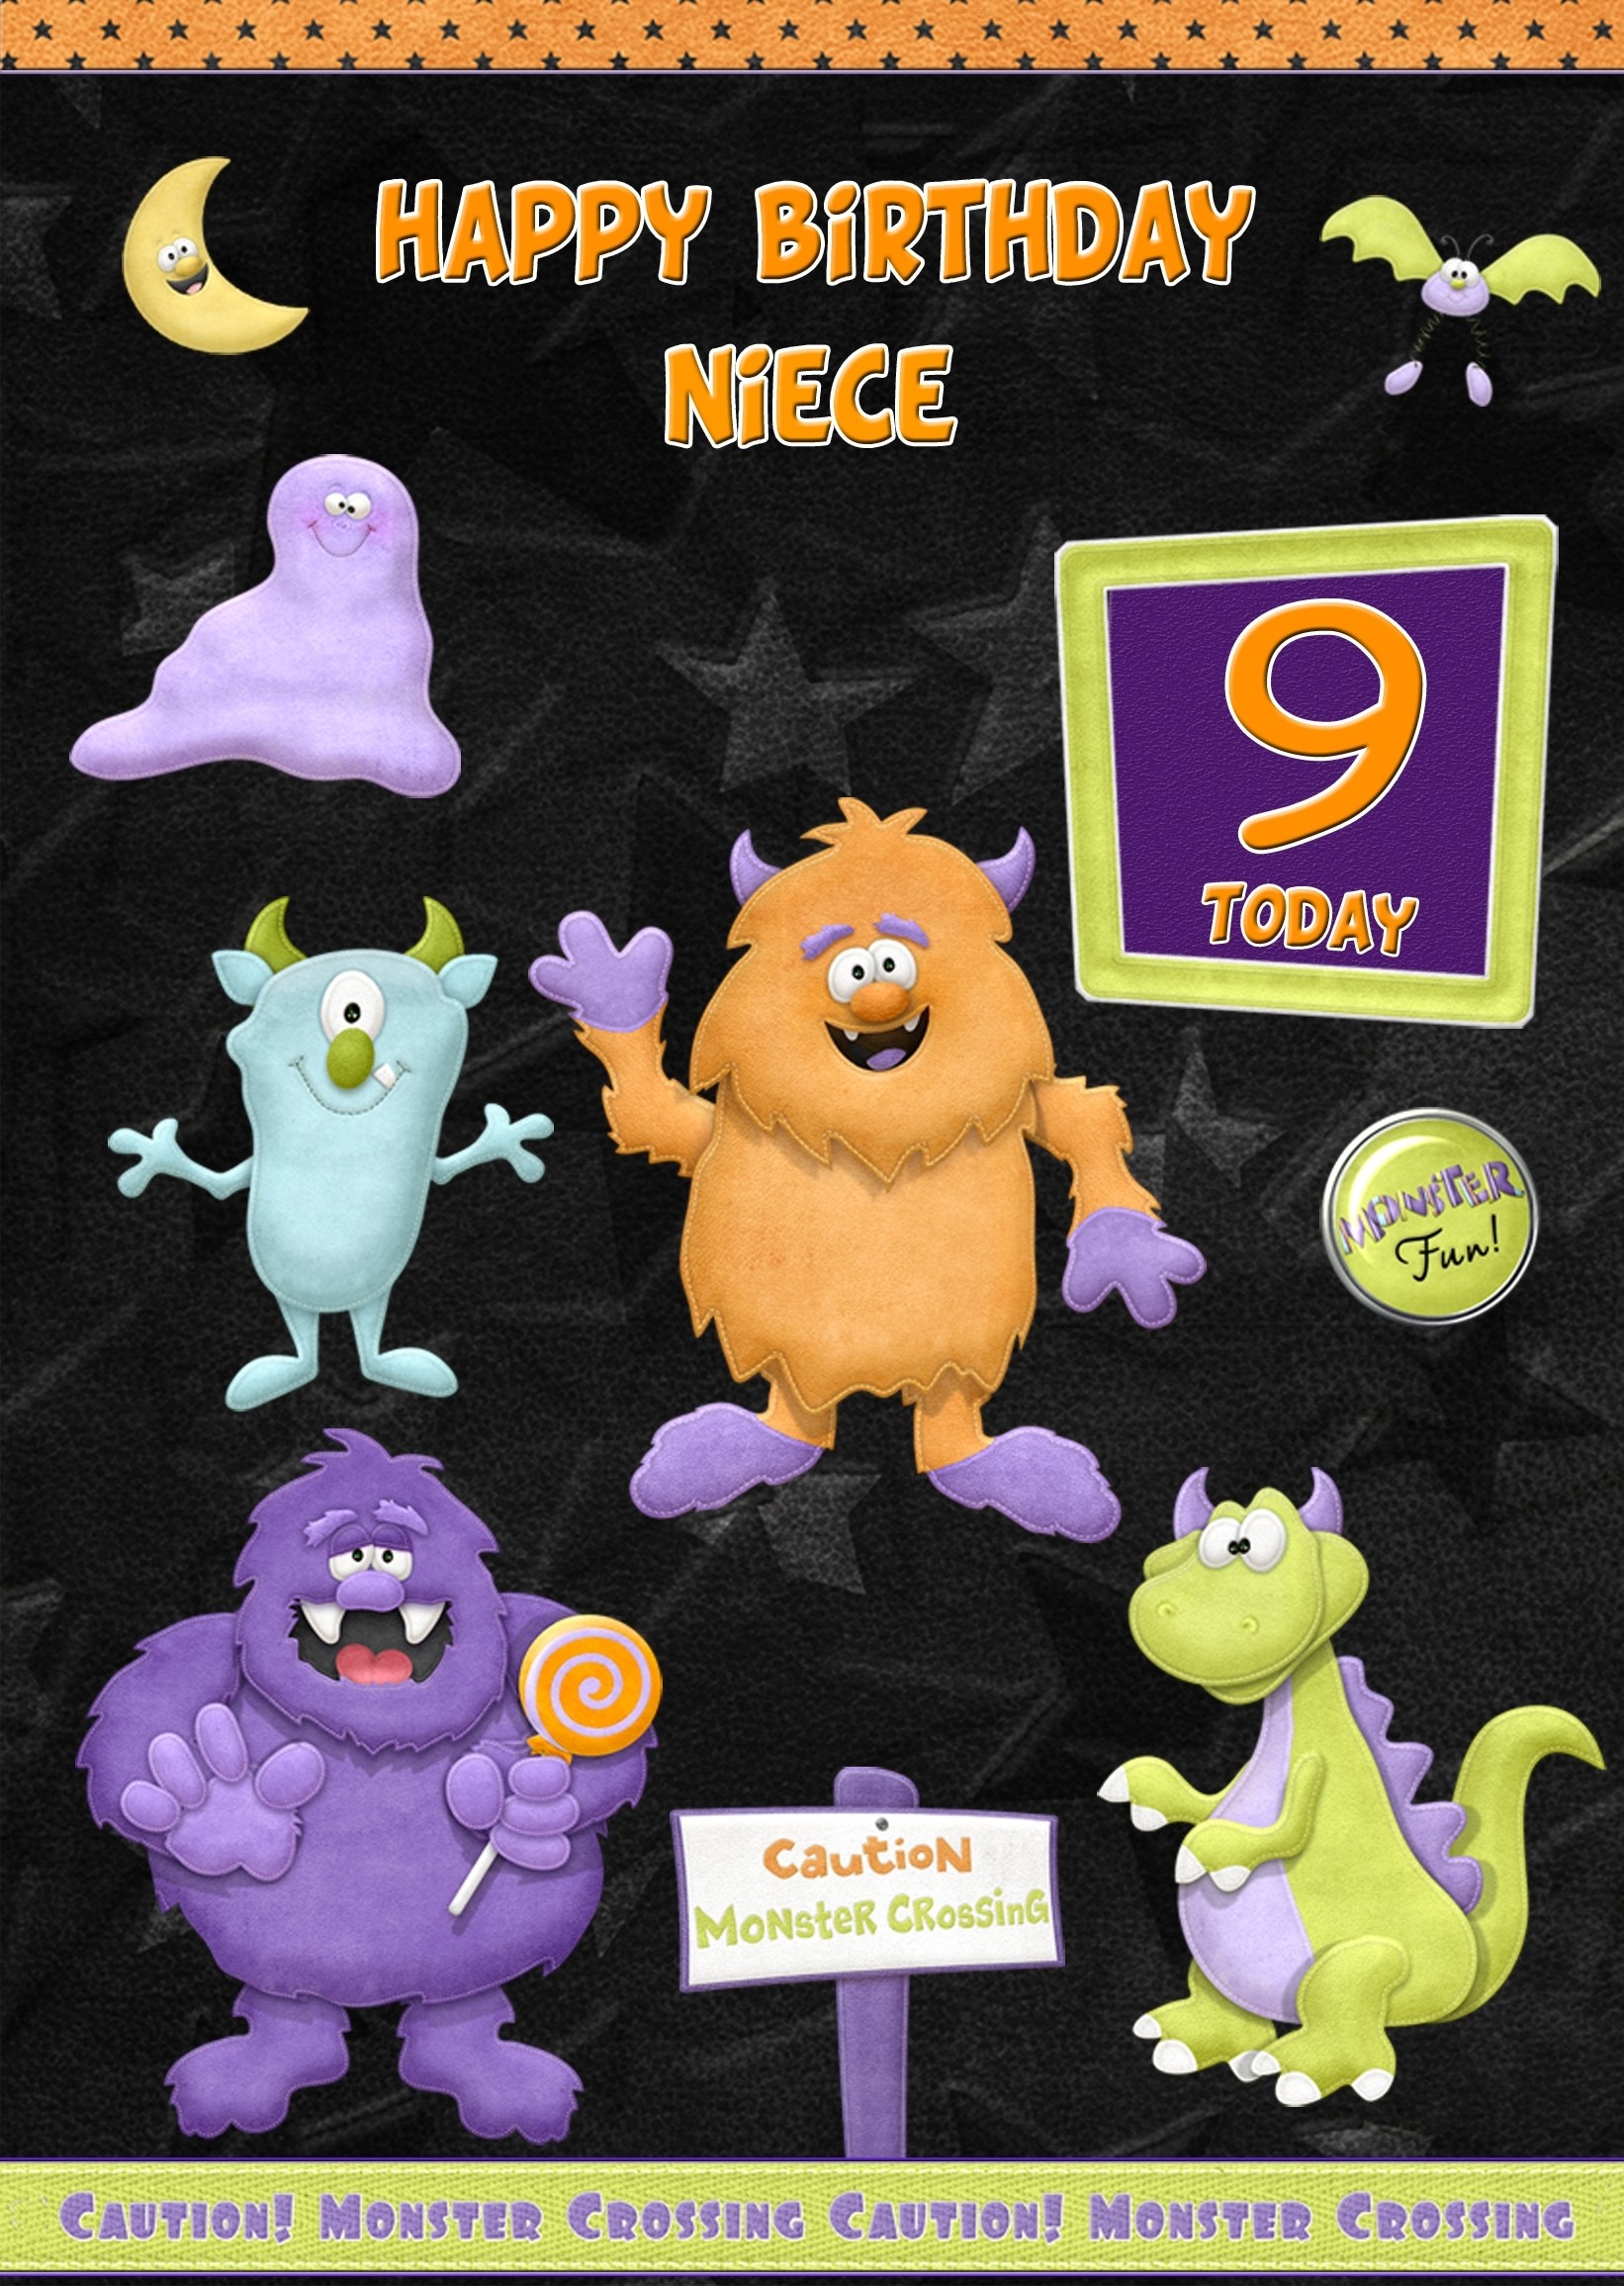 Kids 9th Birthday Funny Monster Cartoon Card for Niece